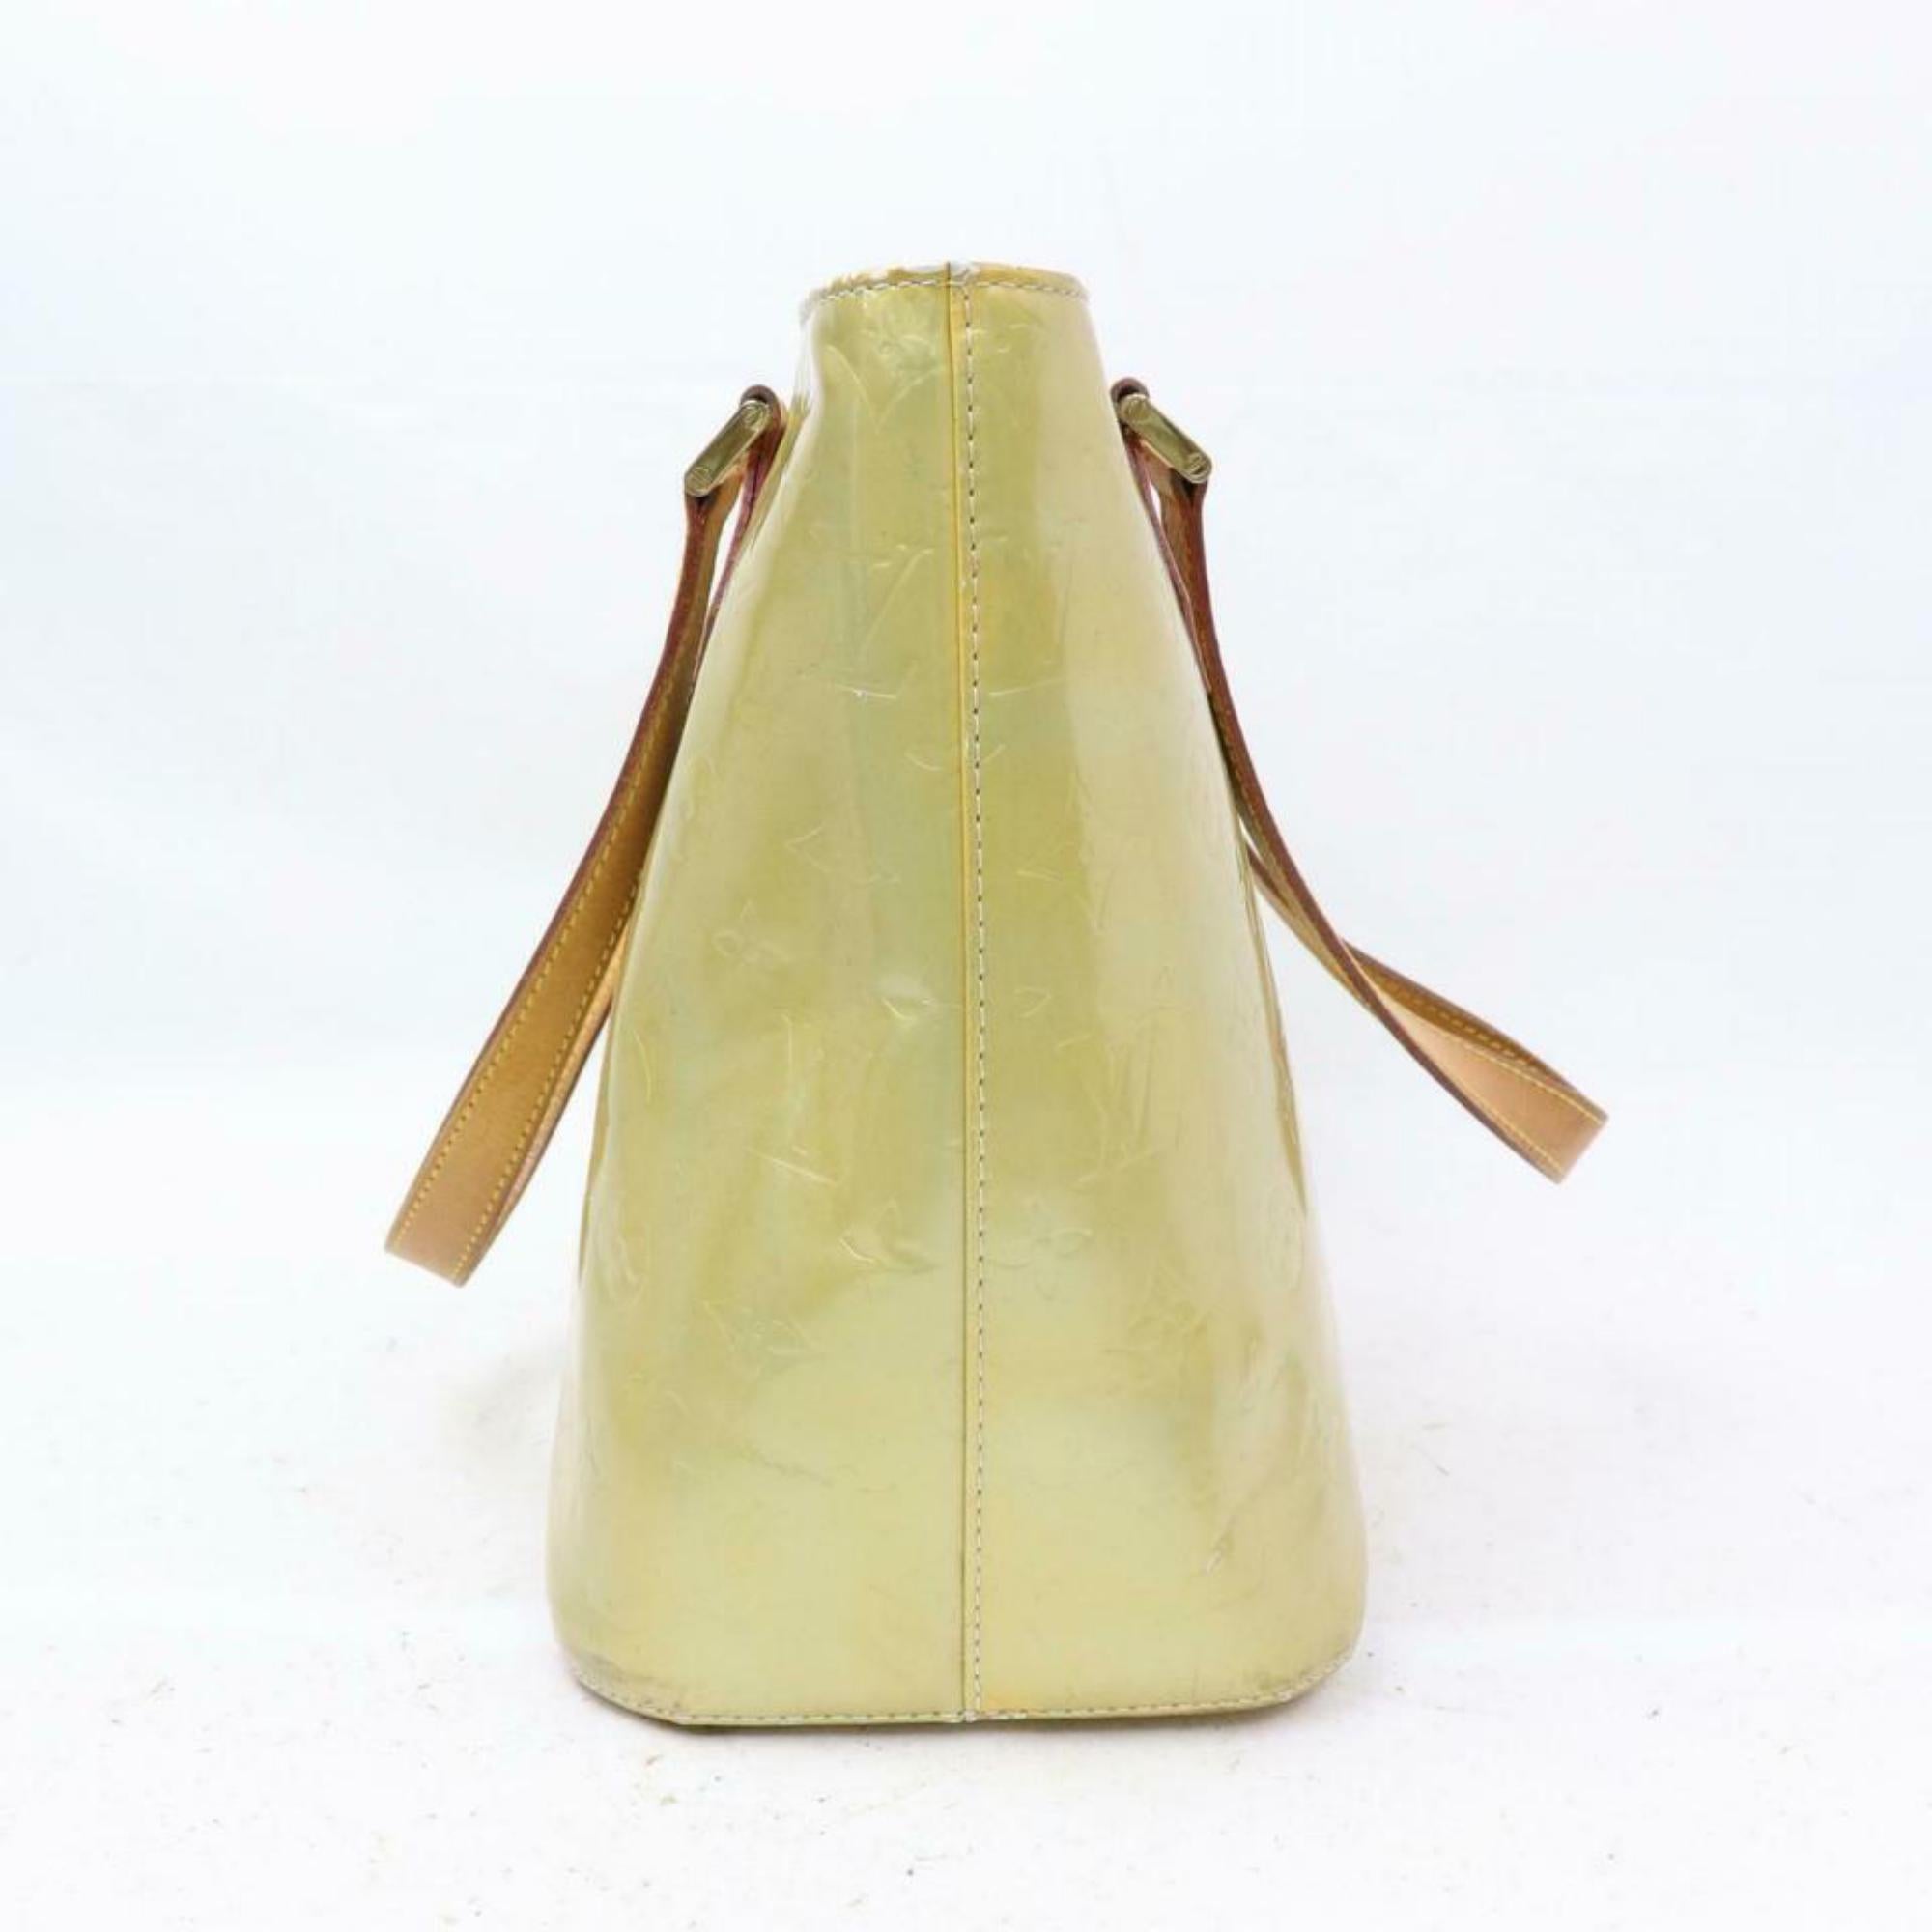 Beige Louis Vuitton Houston Zip Tote 870593 Green-gold Vernis Leather and Shoulder Bag For Sale